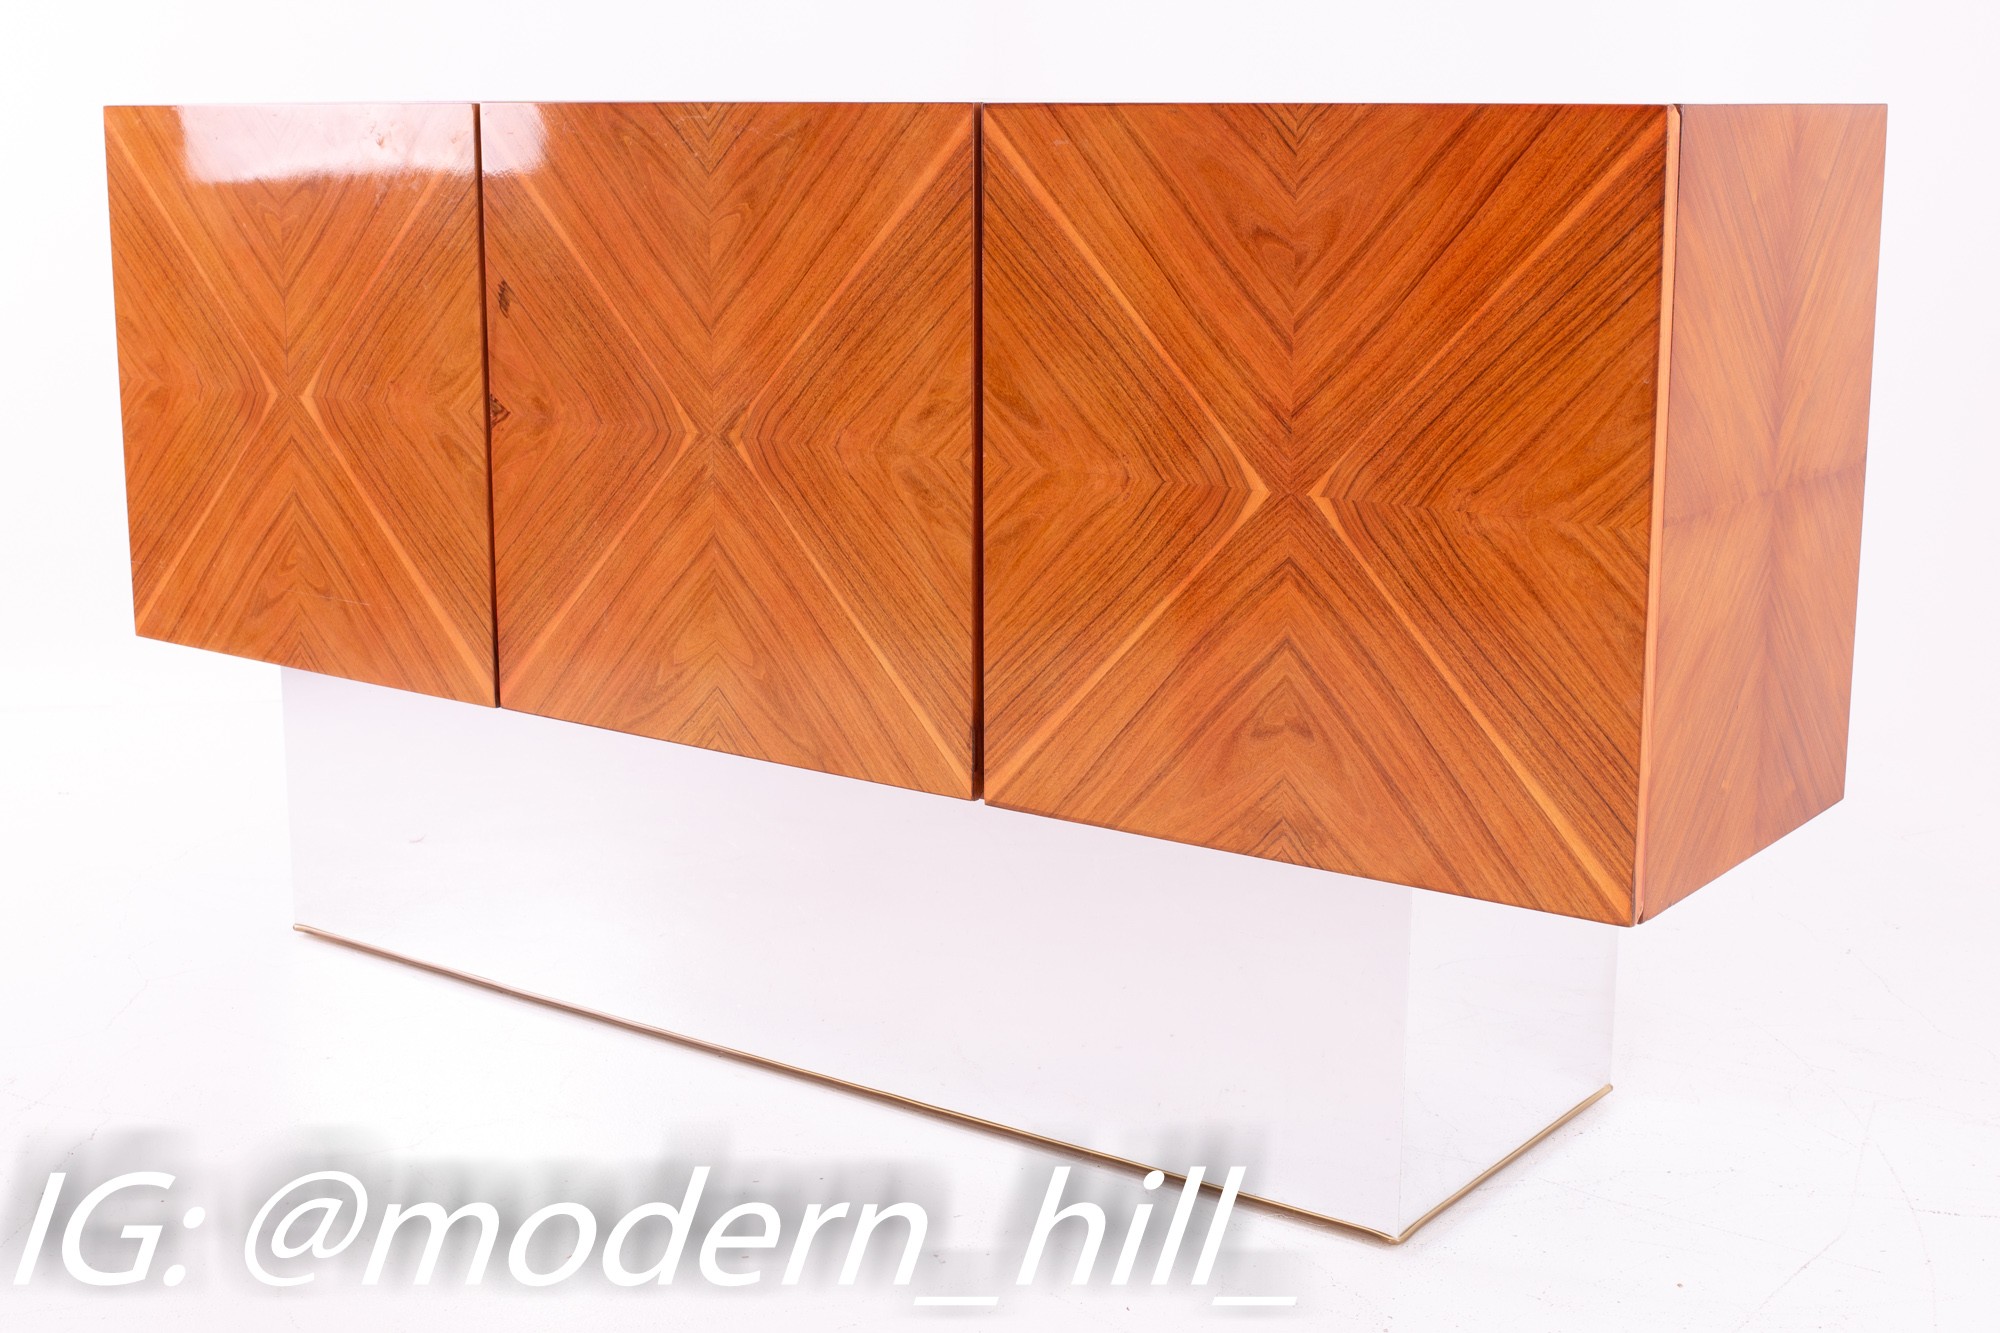 Milo Baughman for Thayer Coggin Mid Century Rosewood Floating Credenza with Chrome Plinth Base